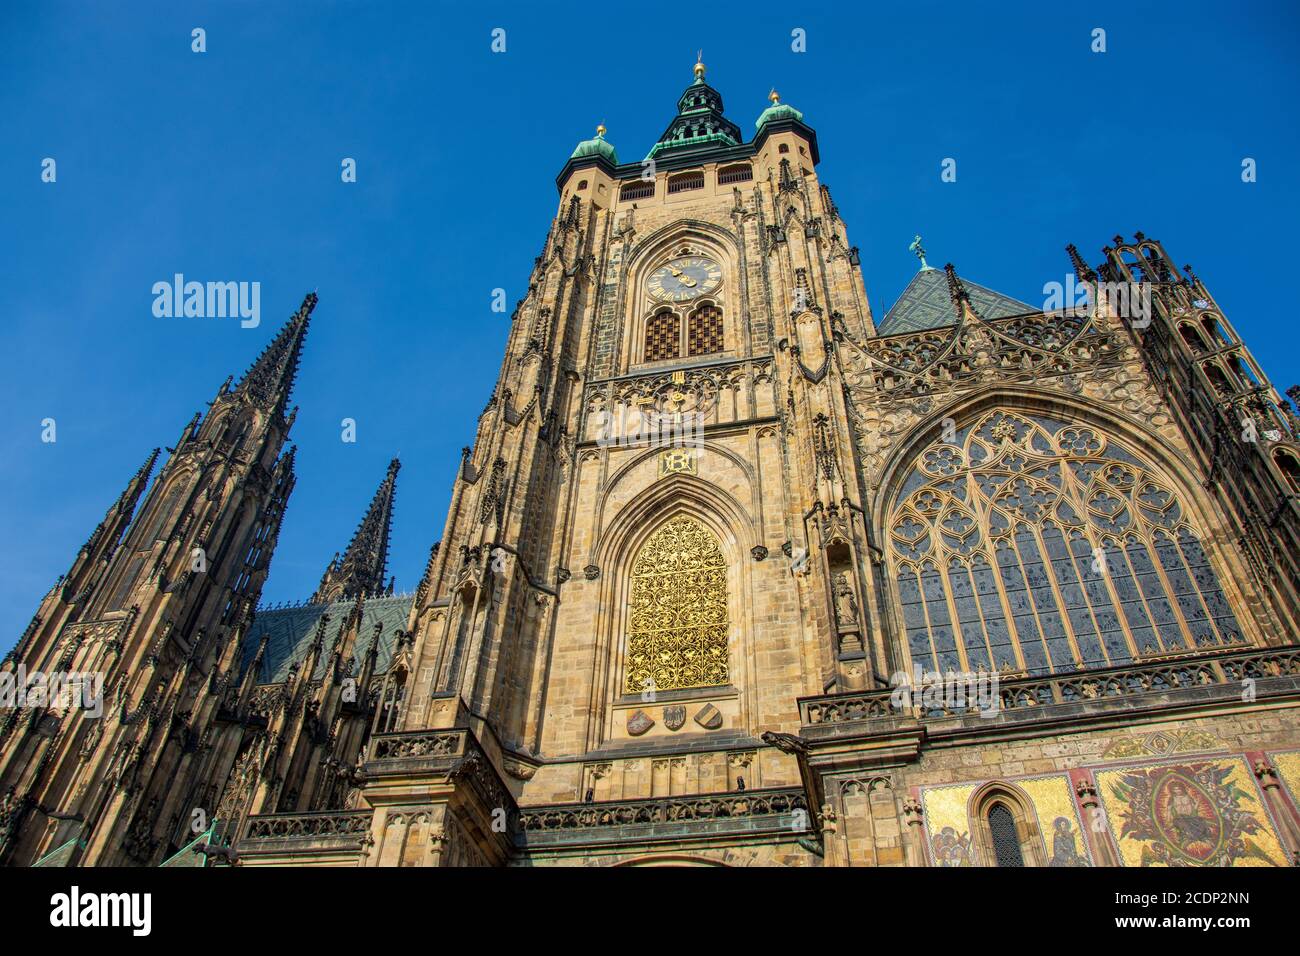 Gothic towers of St. Vitus's cathedral, Prague, Czech Republic Stock Photo